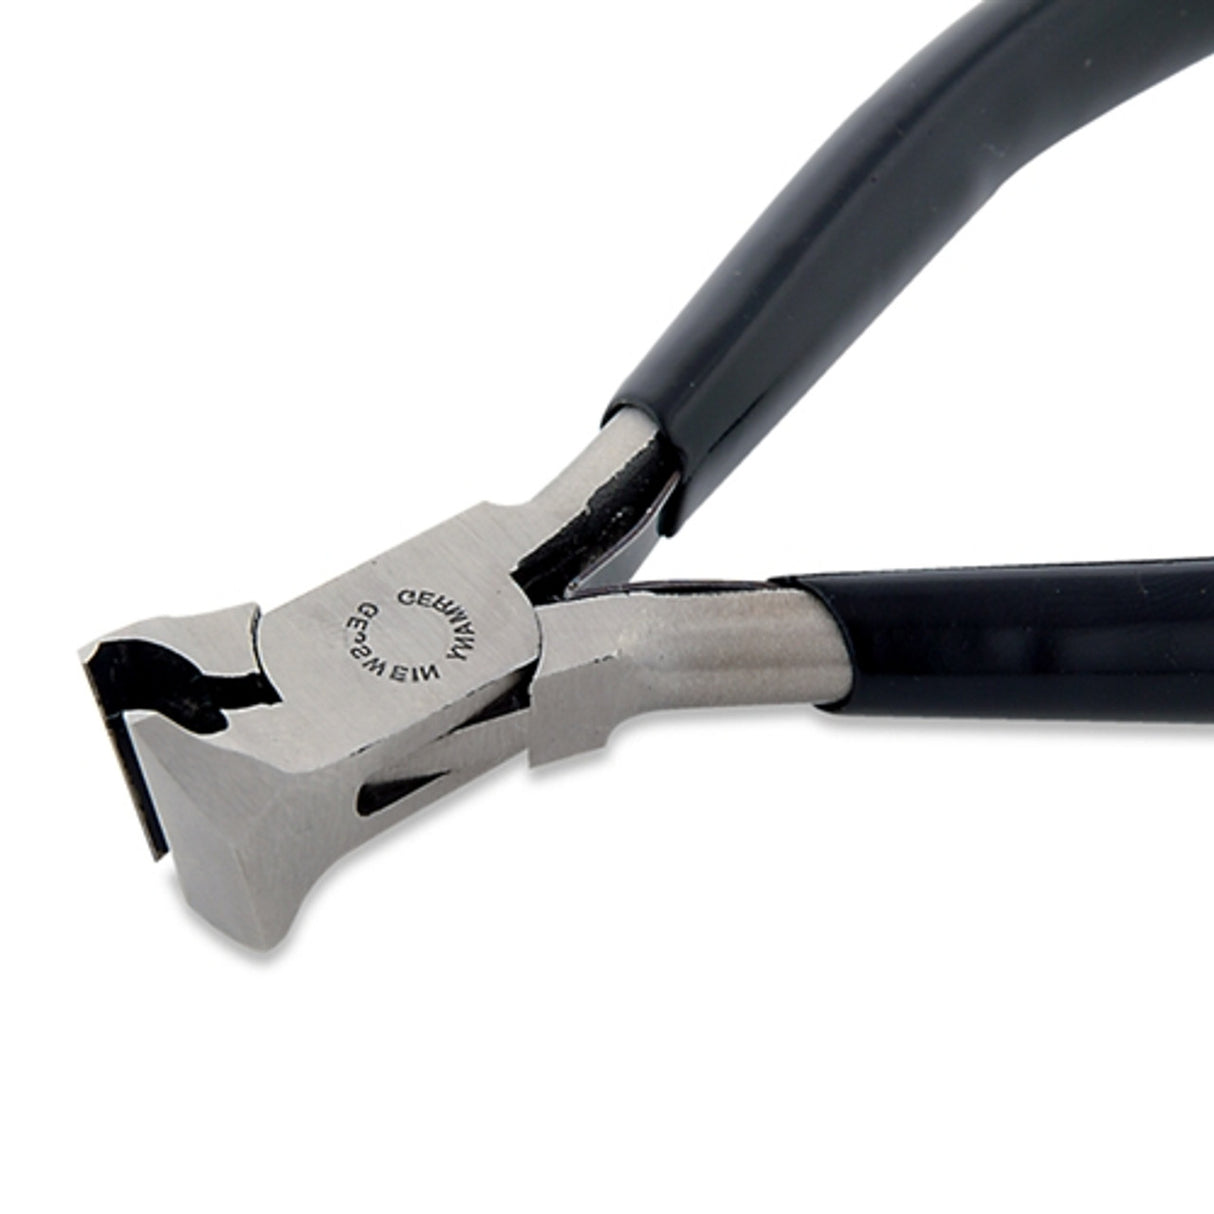 Slimline Box-Joint Oblique Nippers